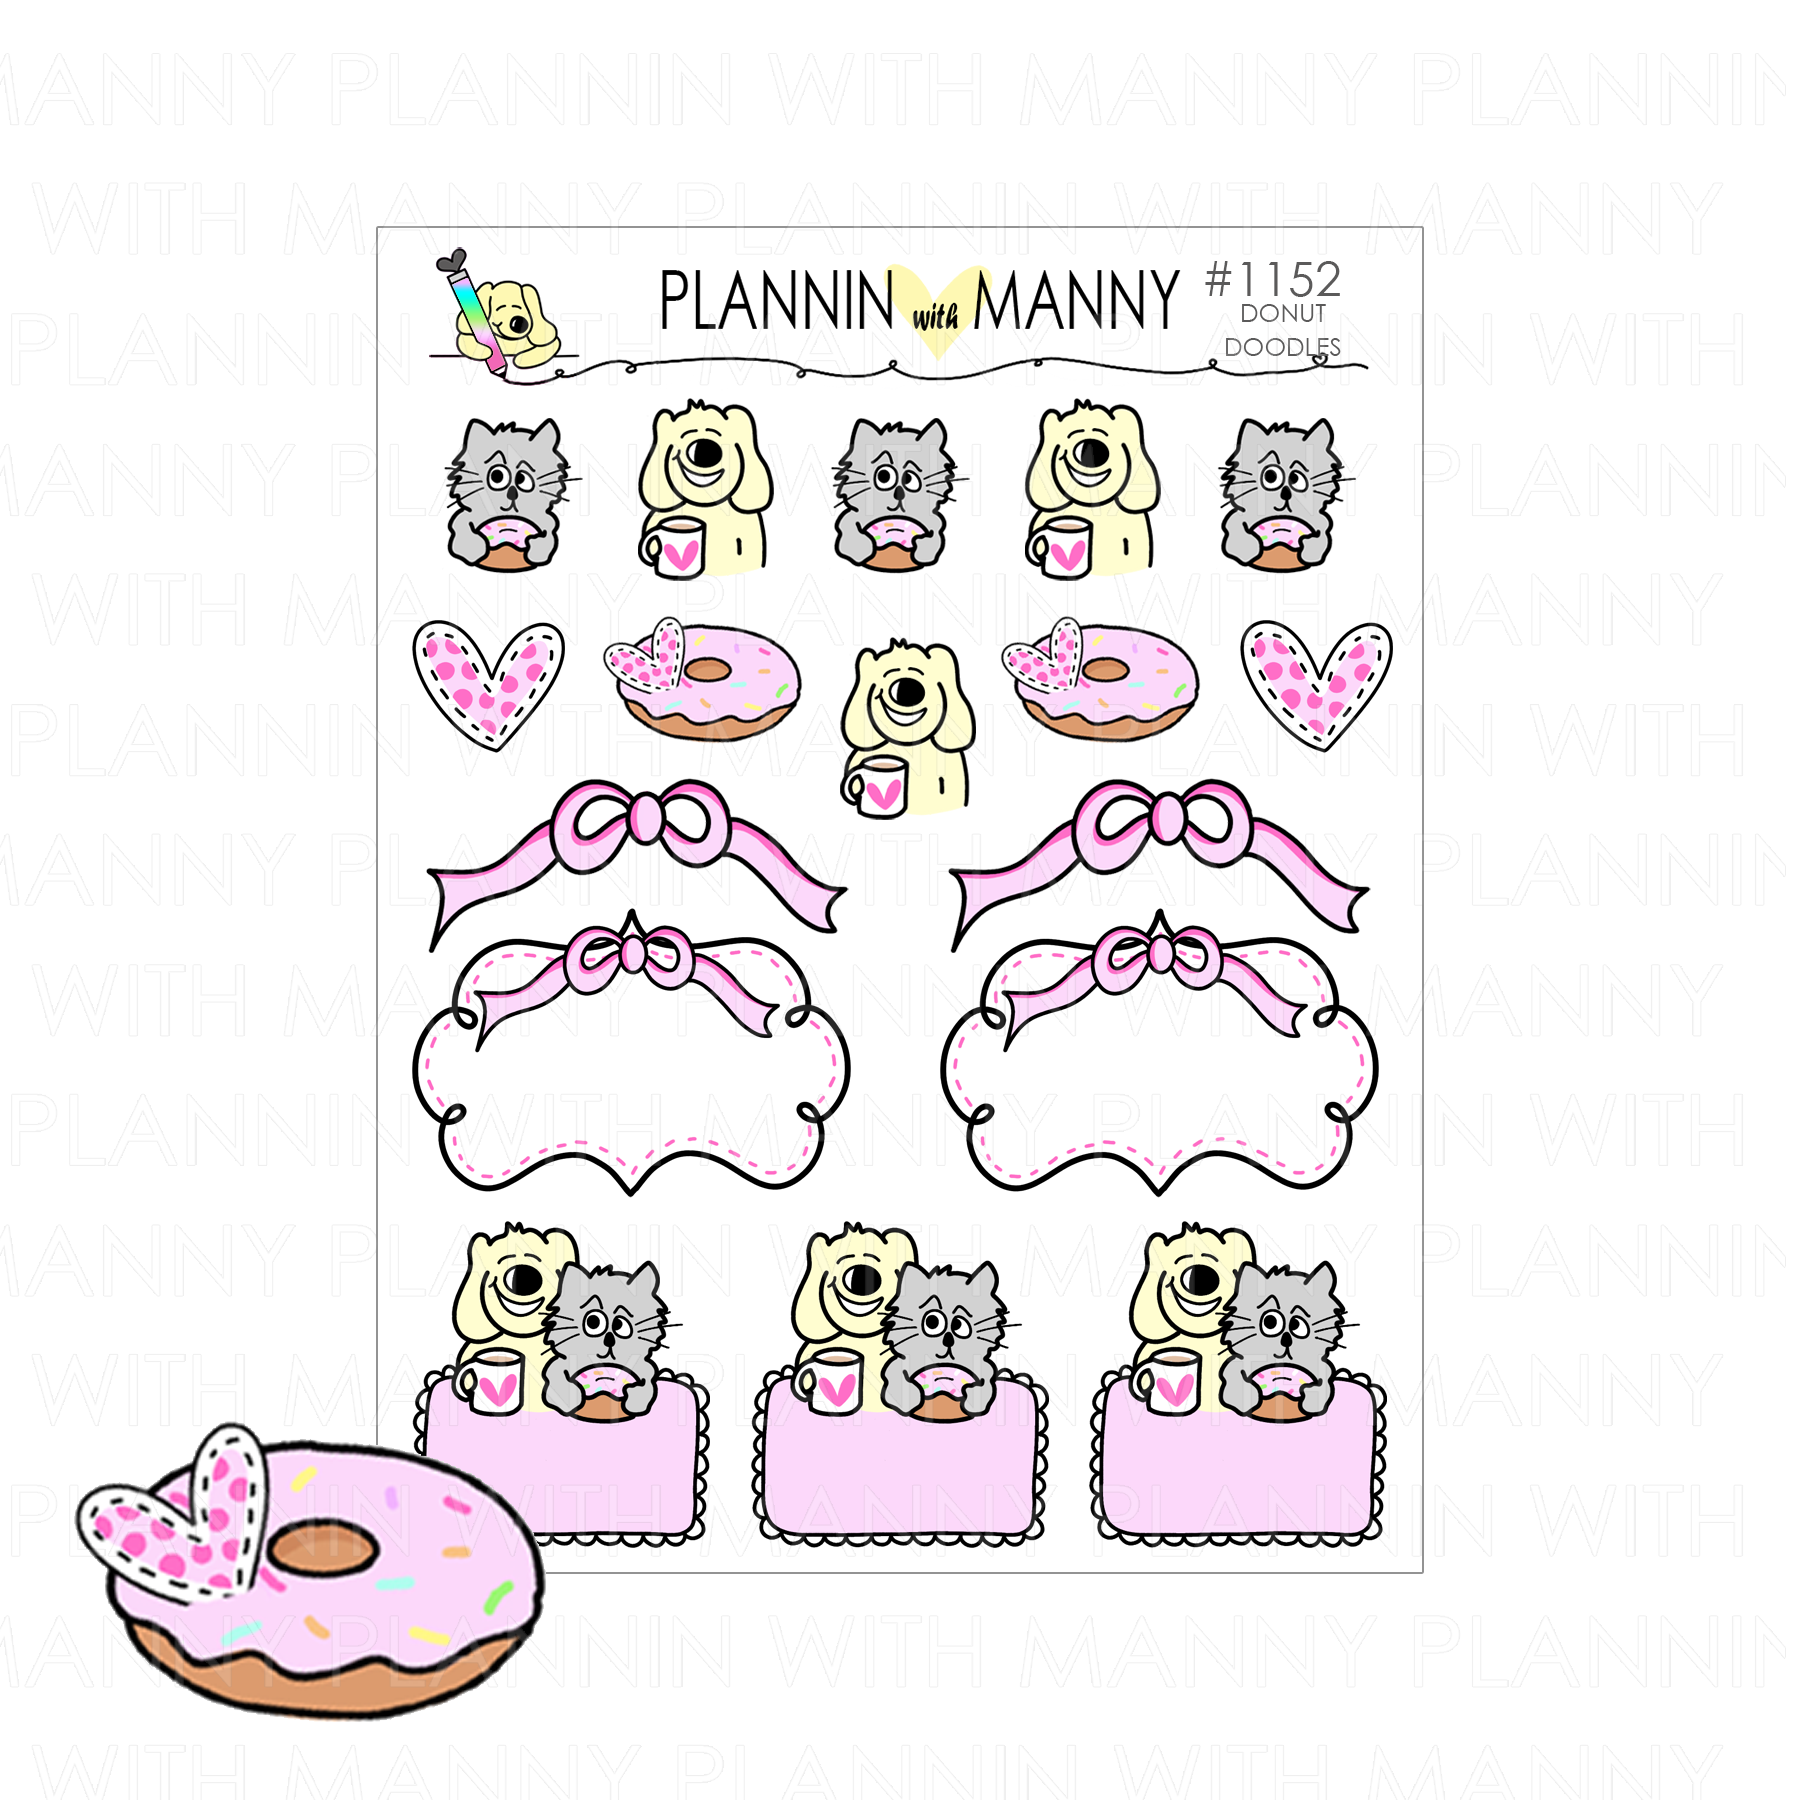 1152 Donut Doodles Planner Stickers - Donut Date Collection